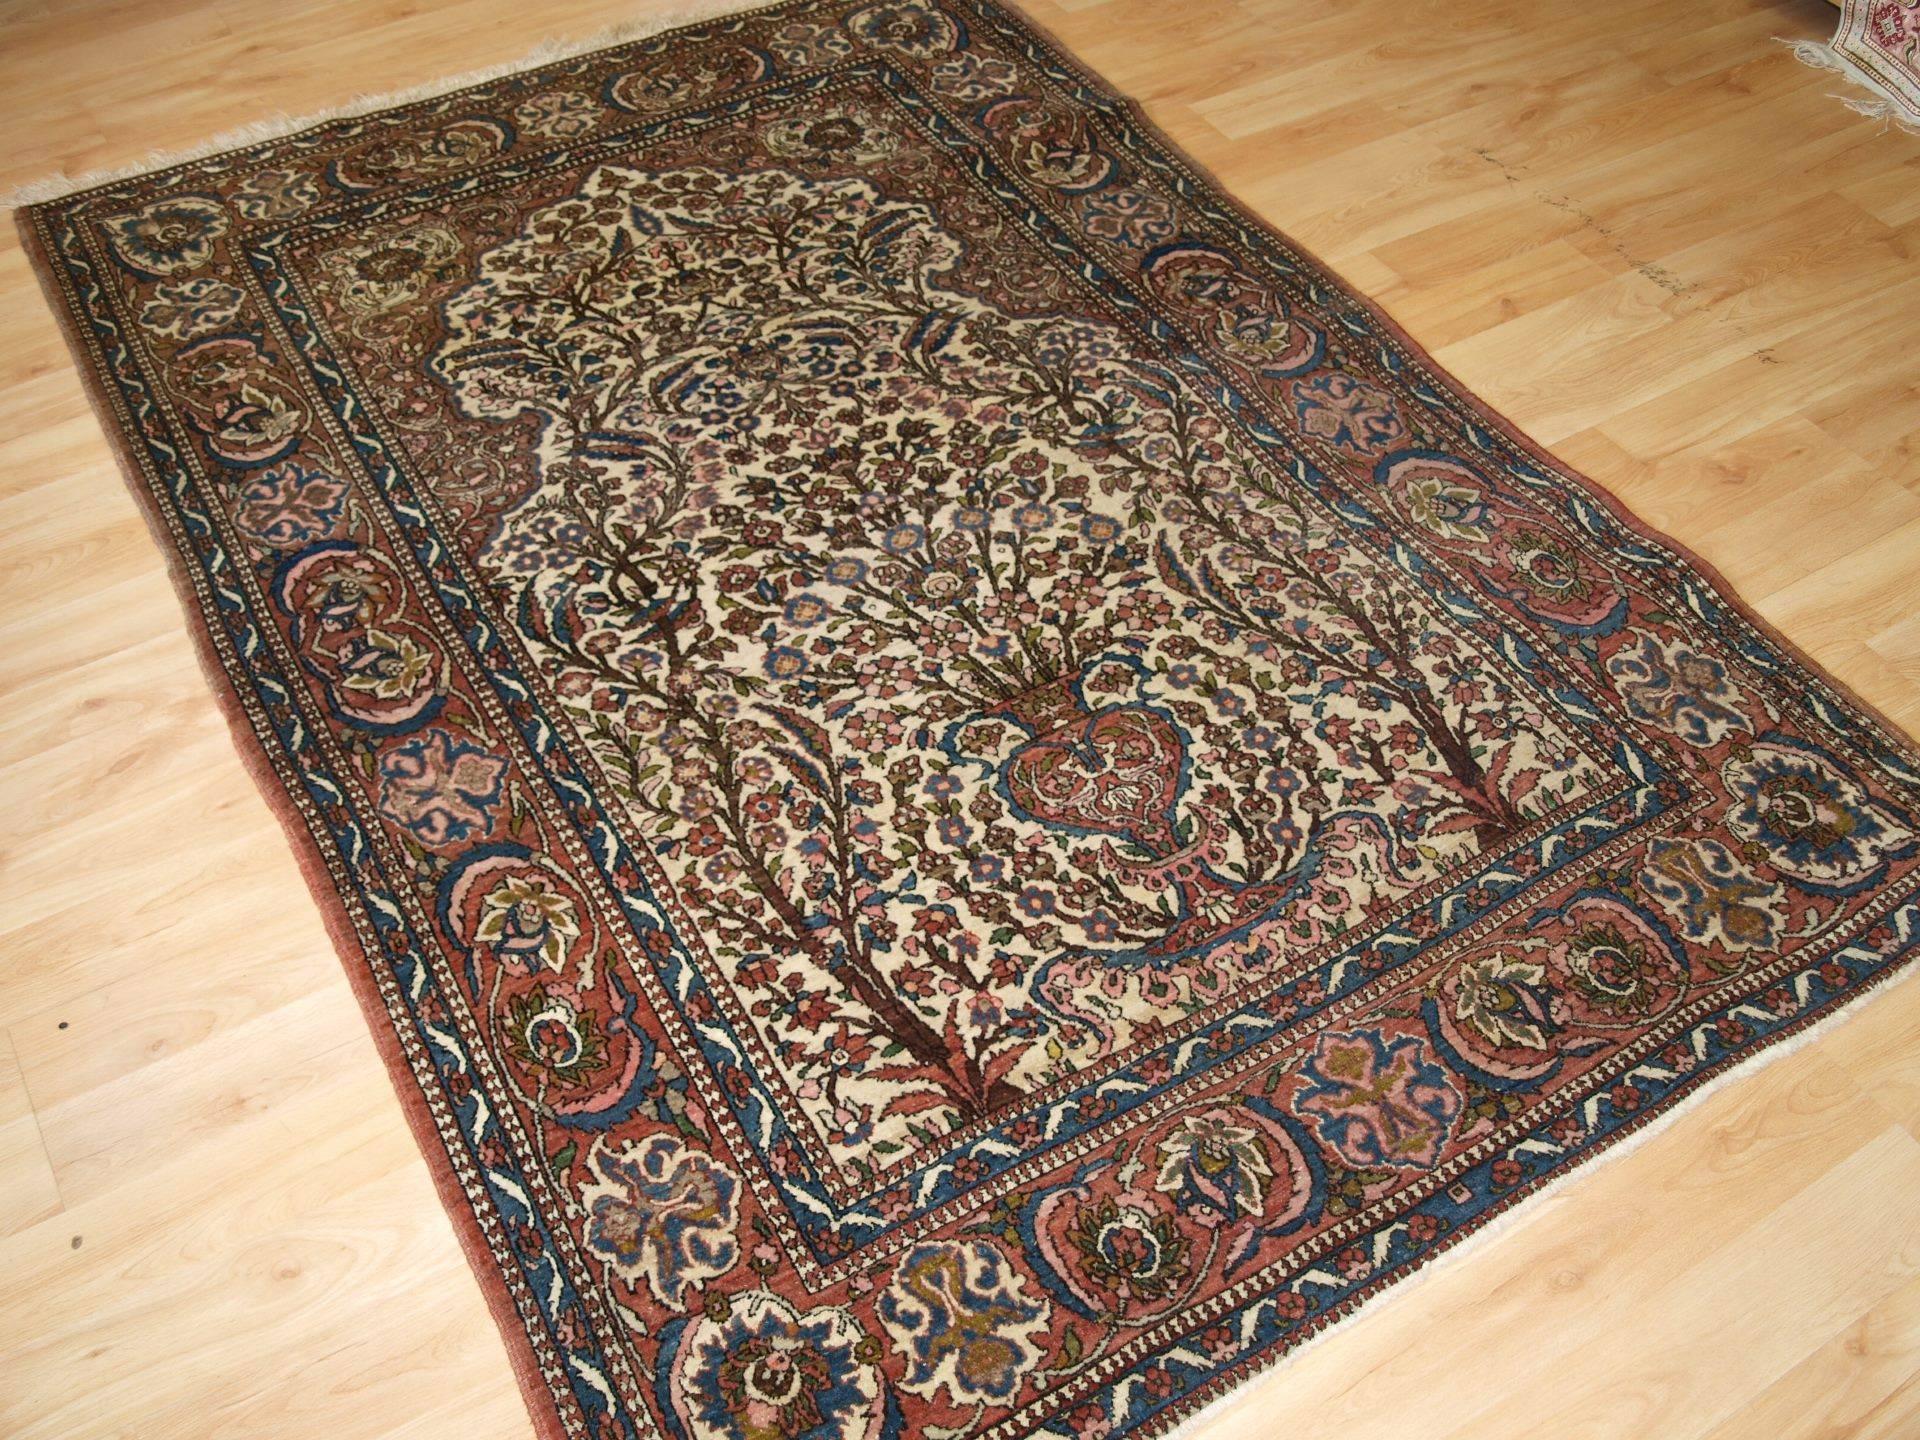 Antique isfahan prayer rug of floral vase design, one of a pair, circa 1900
Size: 6ft 7in x 4ft 6in (200 x 136cm).

Antique Isfahan prayer rug with a very traditional floral vase design. 

circa 1900.

The floral spray growing out of the vase